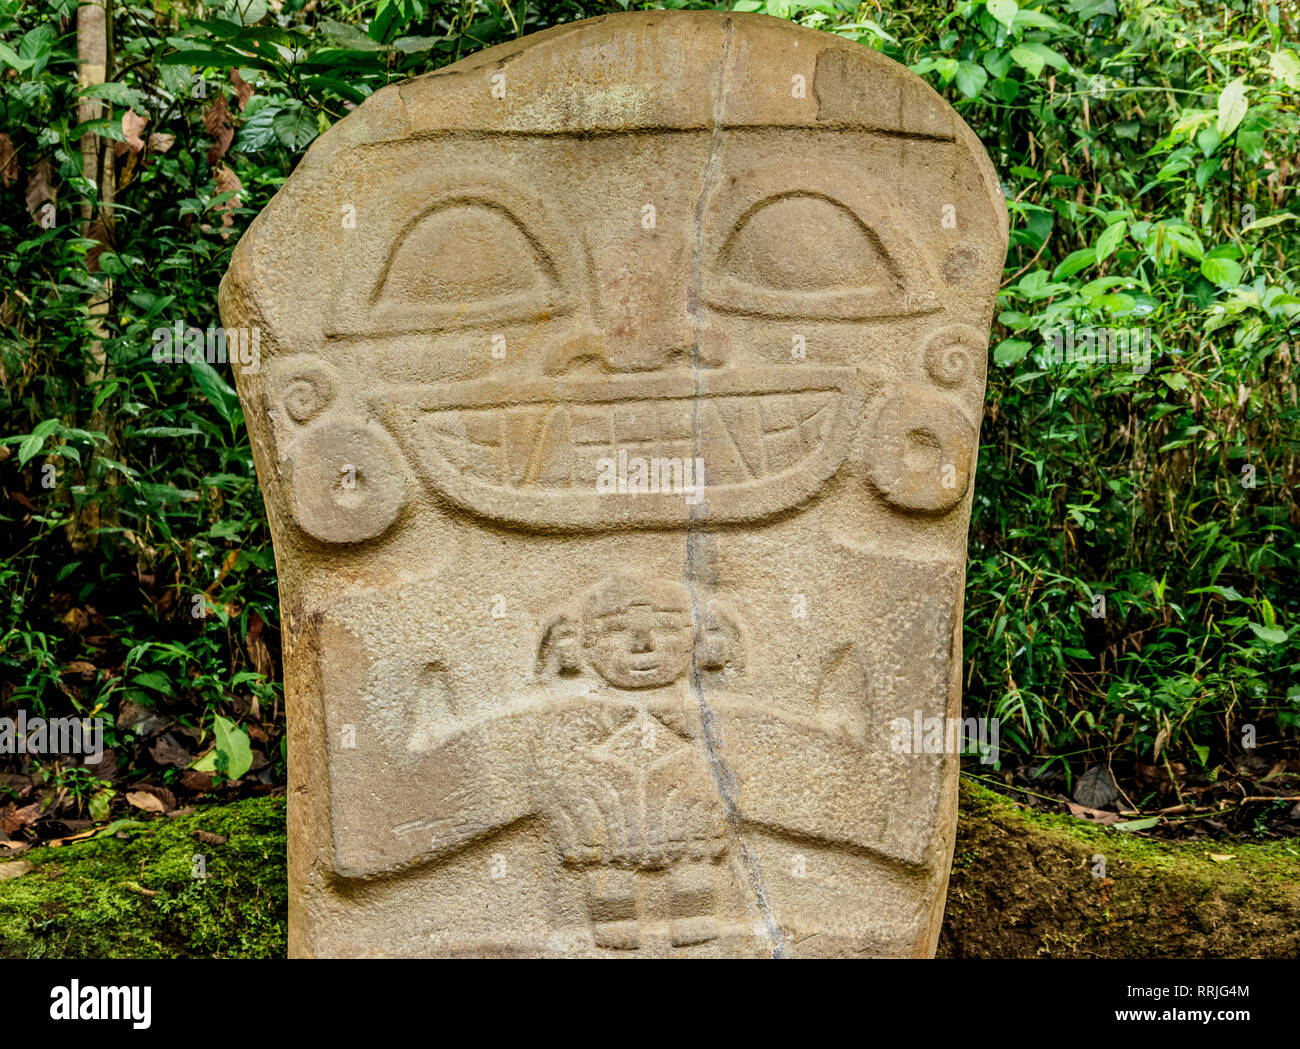 Pre-Columbian sculpture, San Agustin Archaeological Park, UNESCO World Heritage Site, Huila Department, Colombia, South America Stock Photo